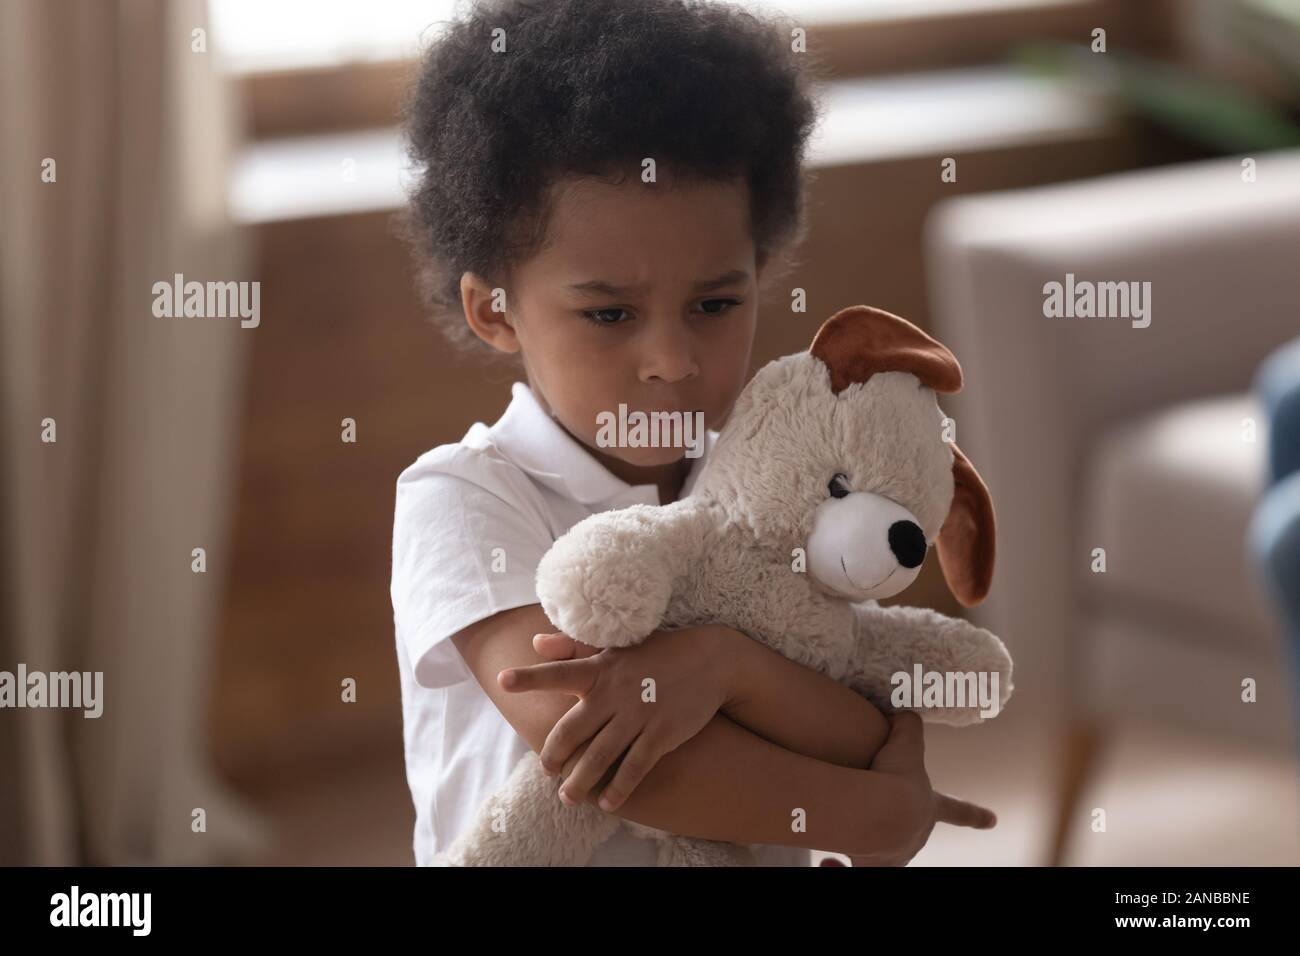 Close up cute upset lonely boy embracing favorite toy. Stock Photo